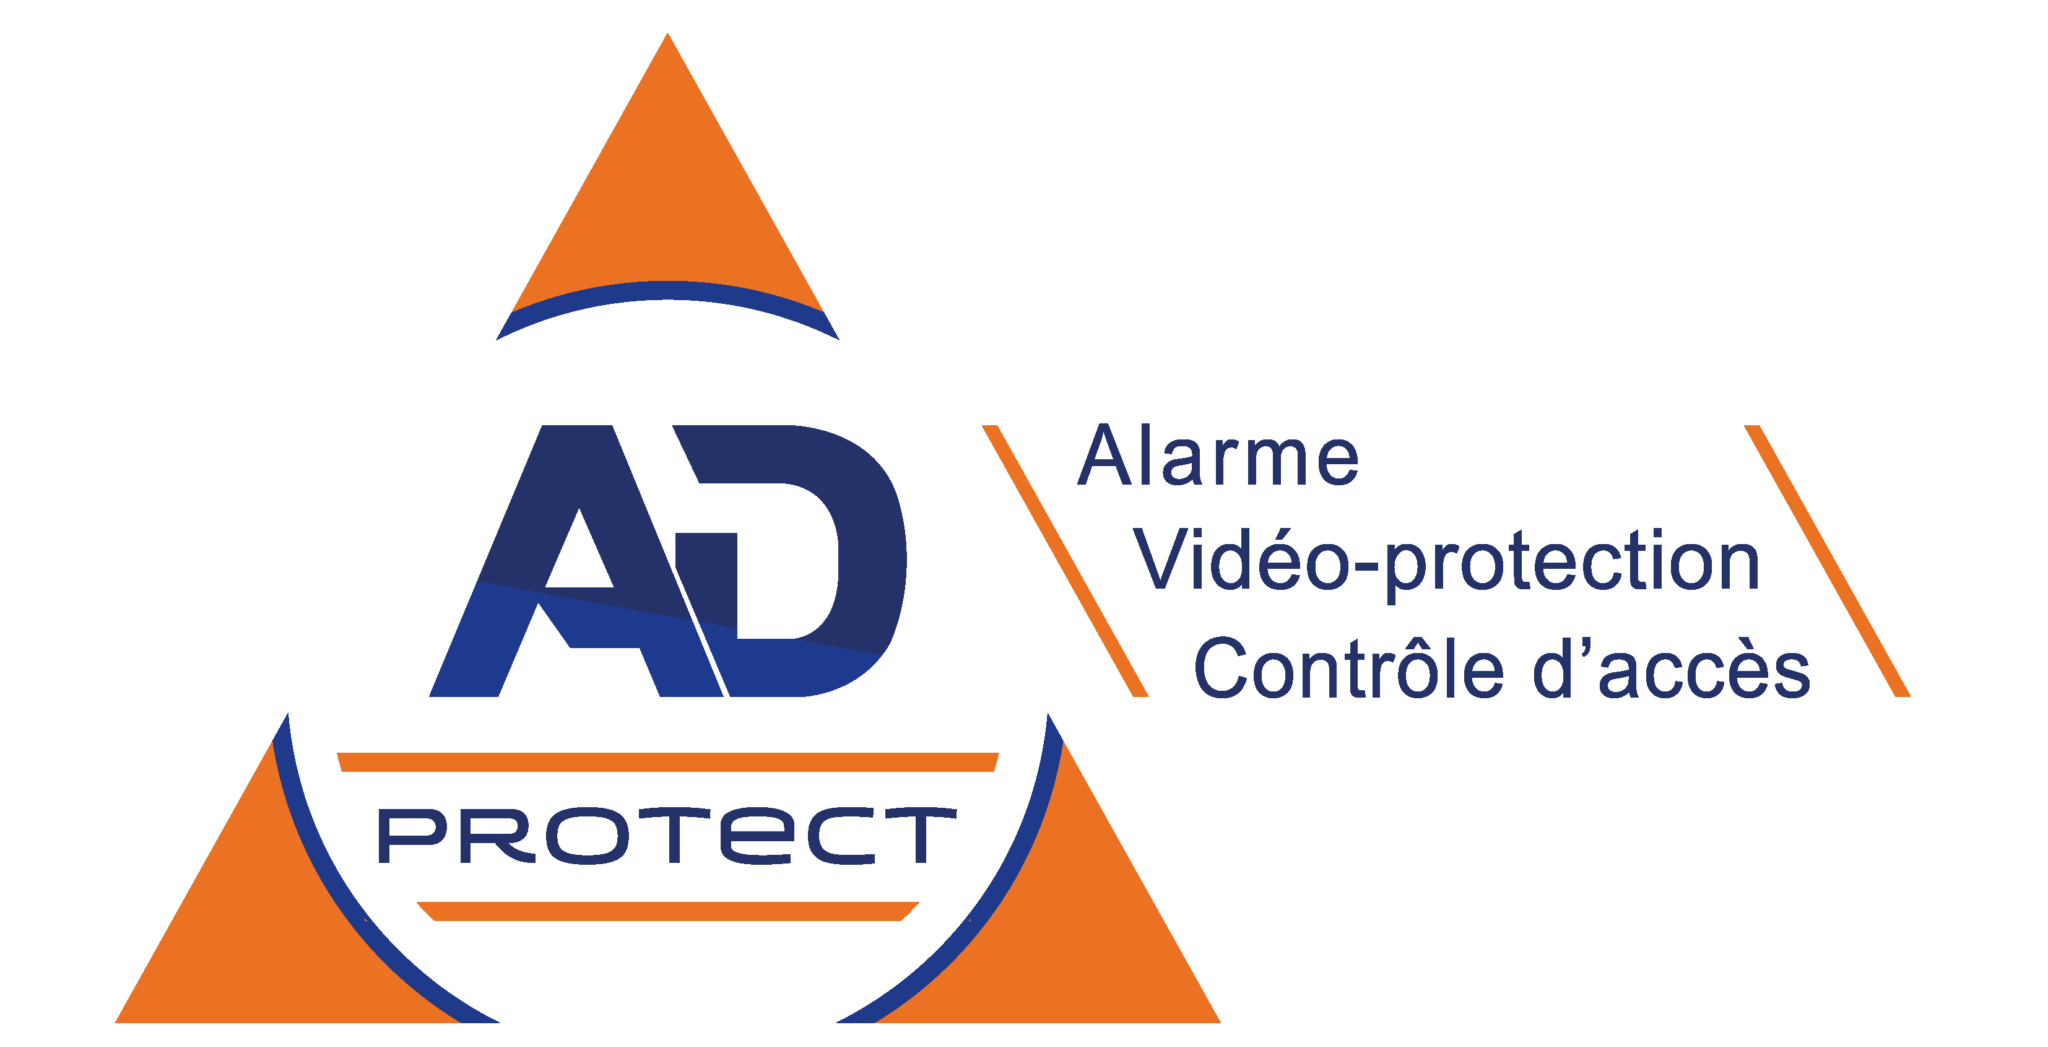 AD protect